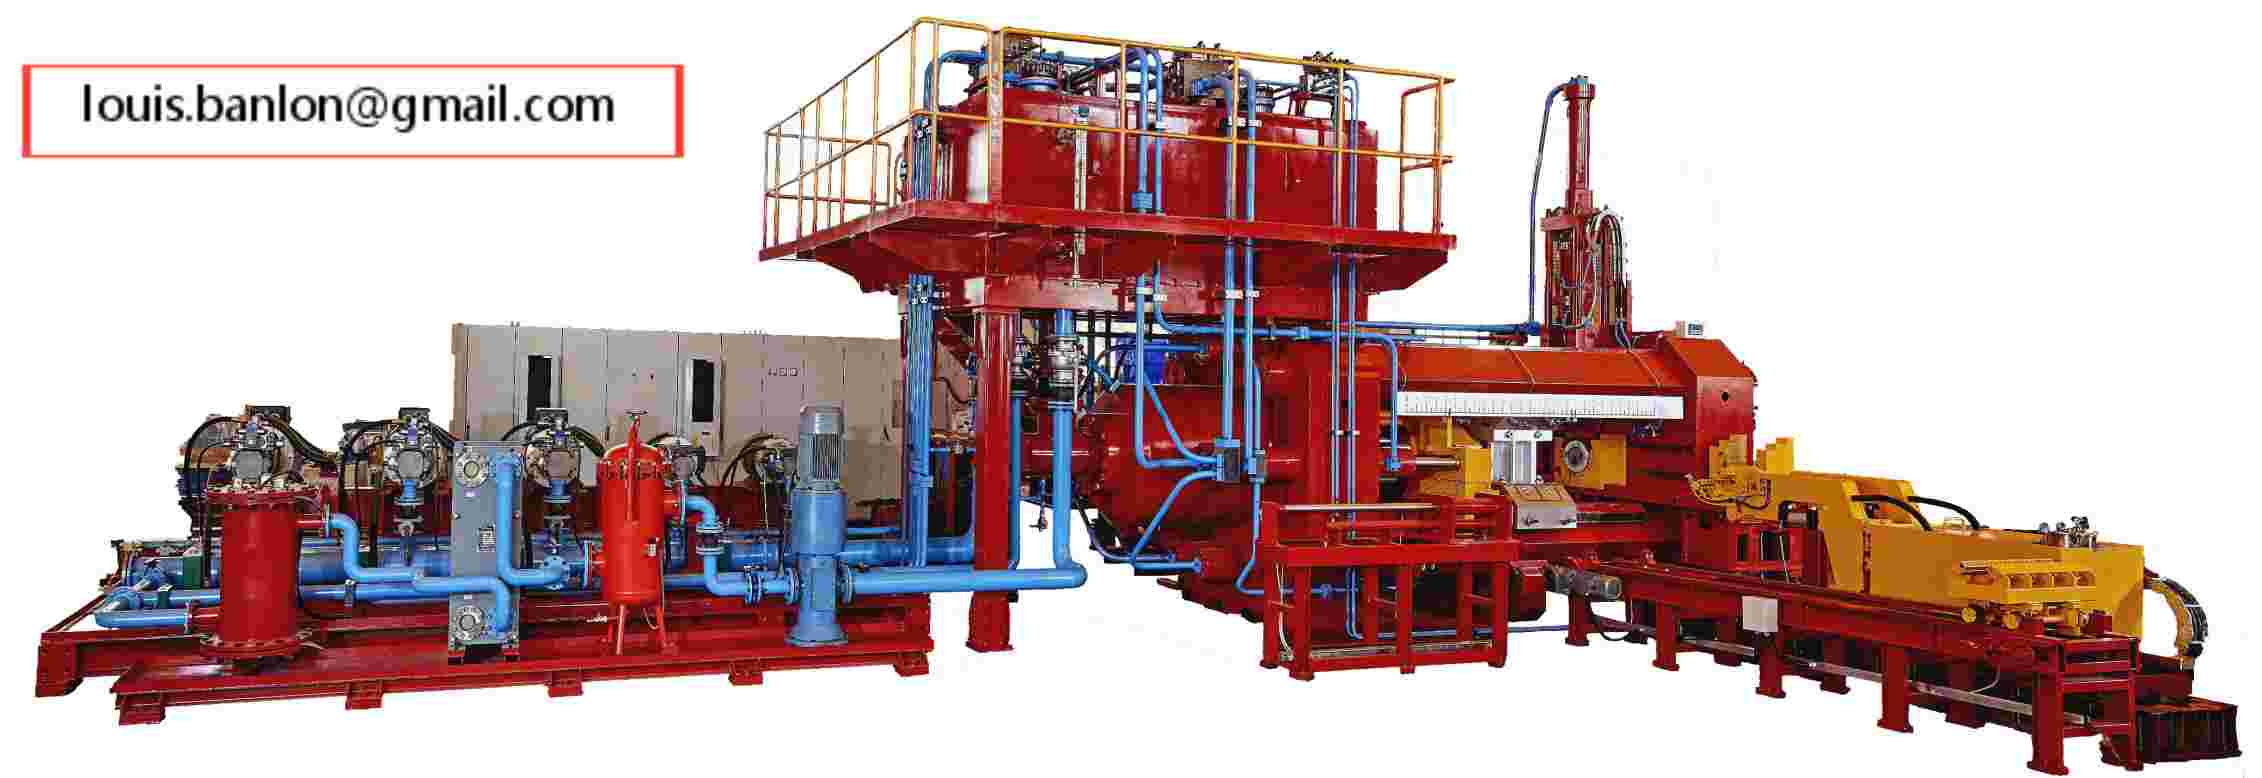 Panorama of the extrusion line